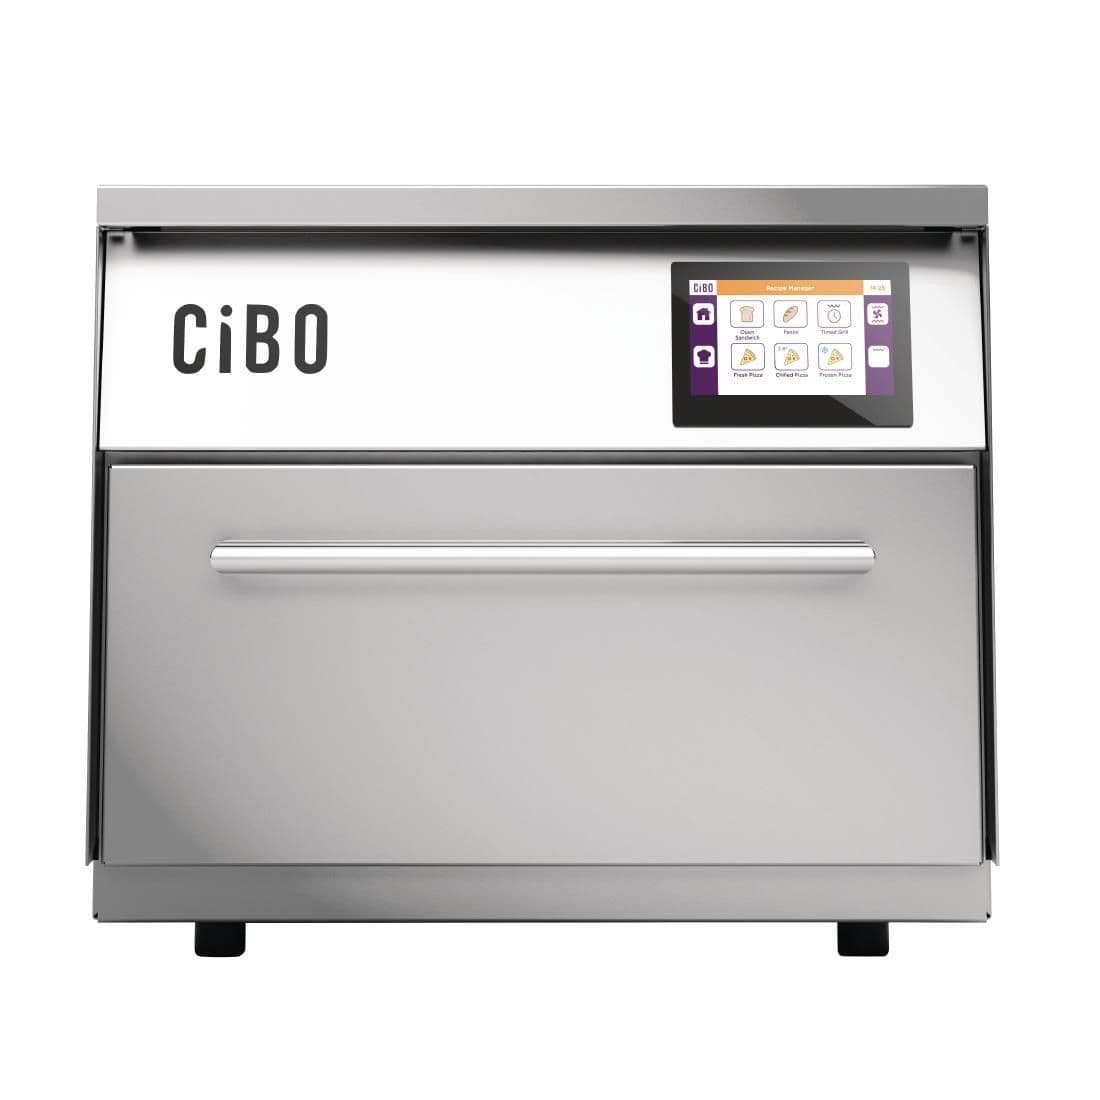 DF029 Lincat Cibo High Speed Oven Stainless Steel Front CIBO/S JD Catering Equipment Solutions Ltd